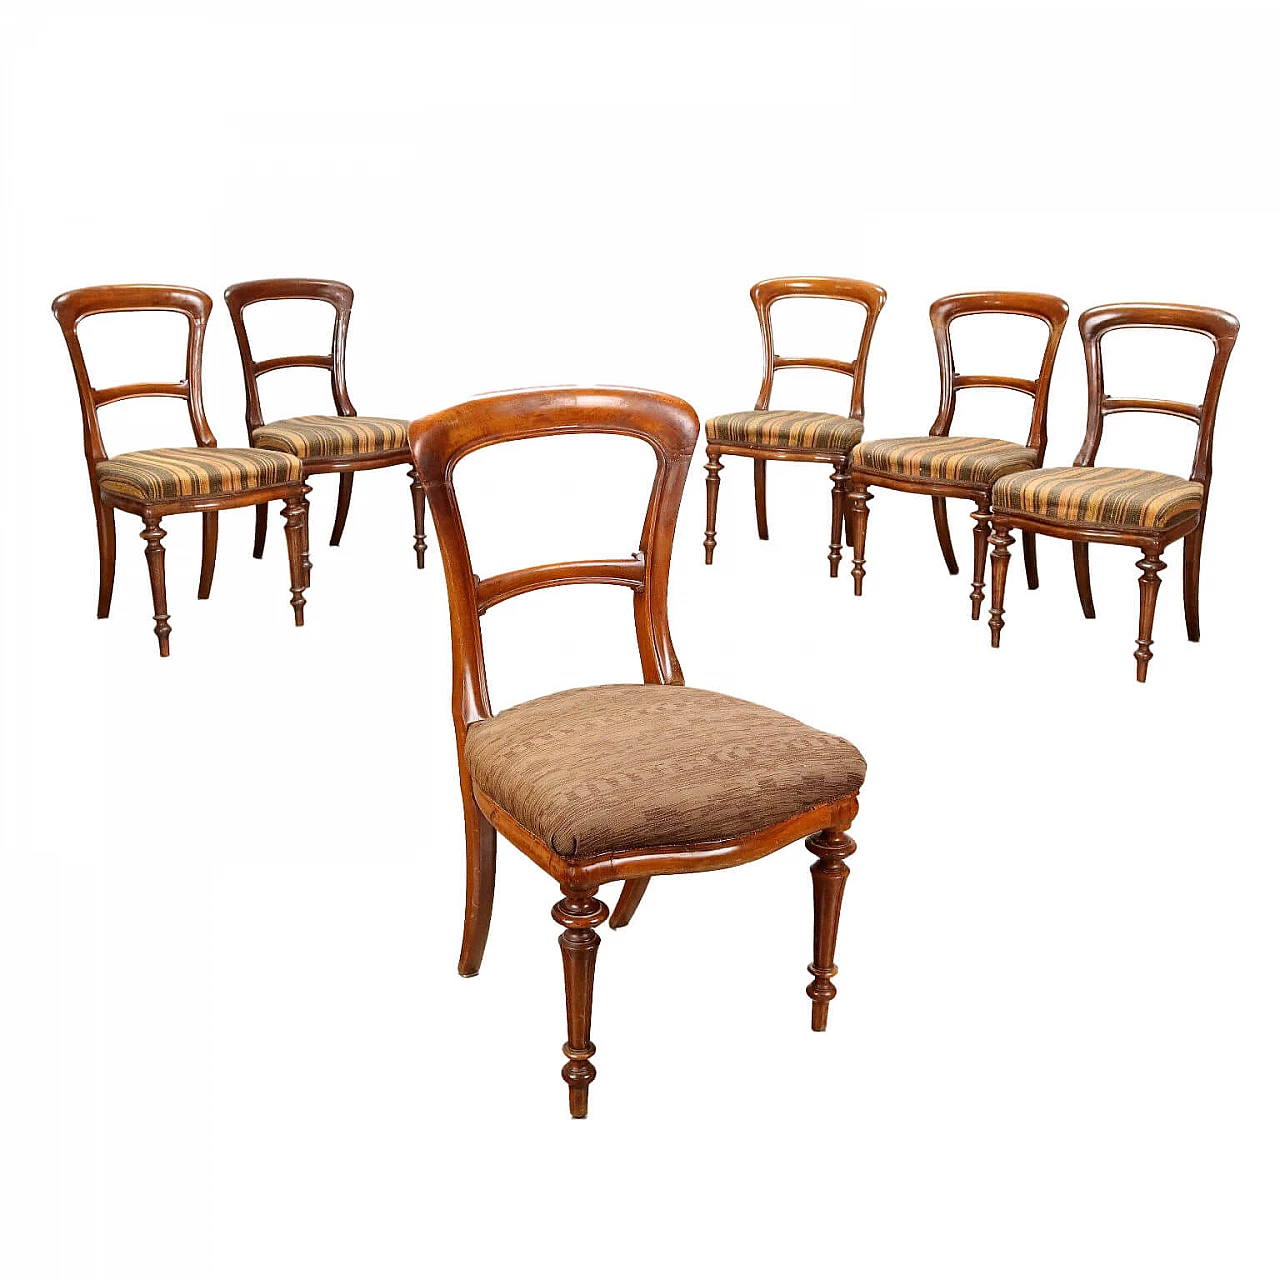 6 Chairs in walnut and fabric, second half of the 19th century 1